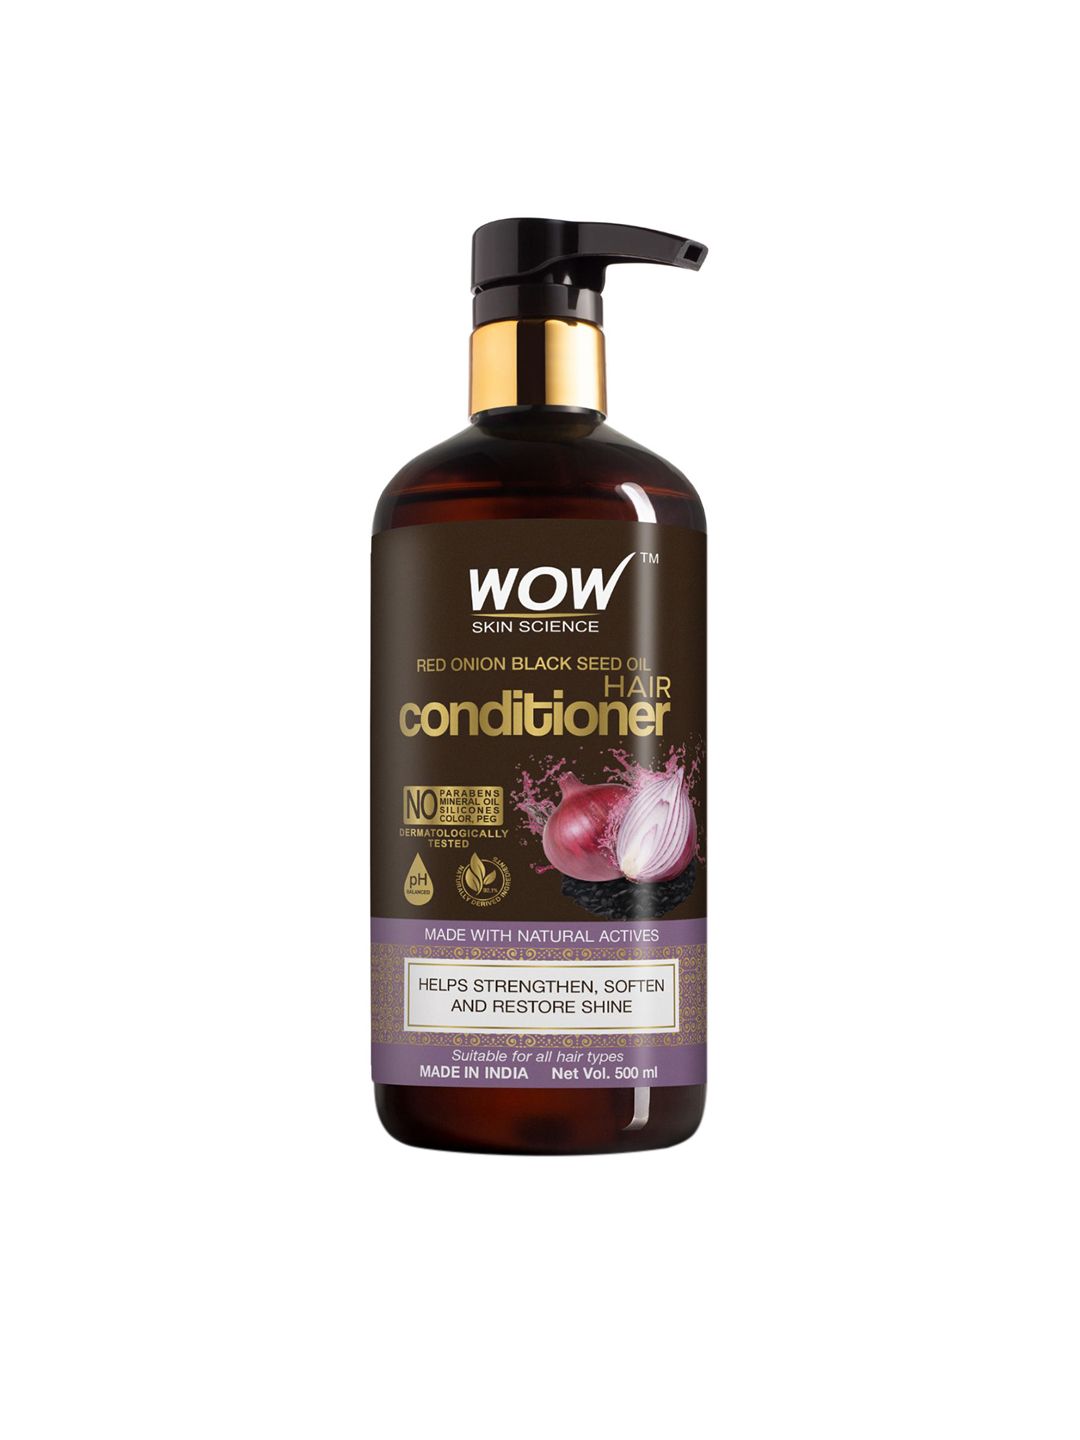 WOW SKIN SCIENCE Unisex Red Onion Black Seed Oil Hair Conditioner -500mL Price in India